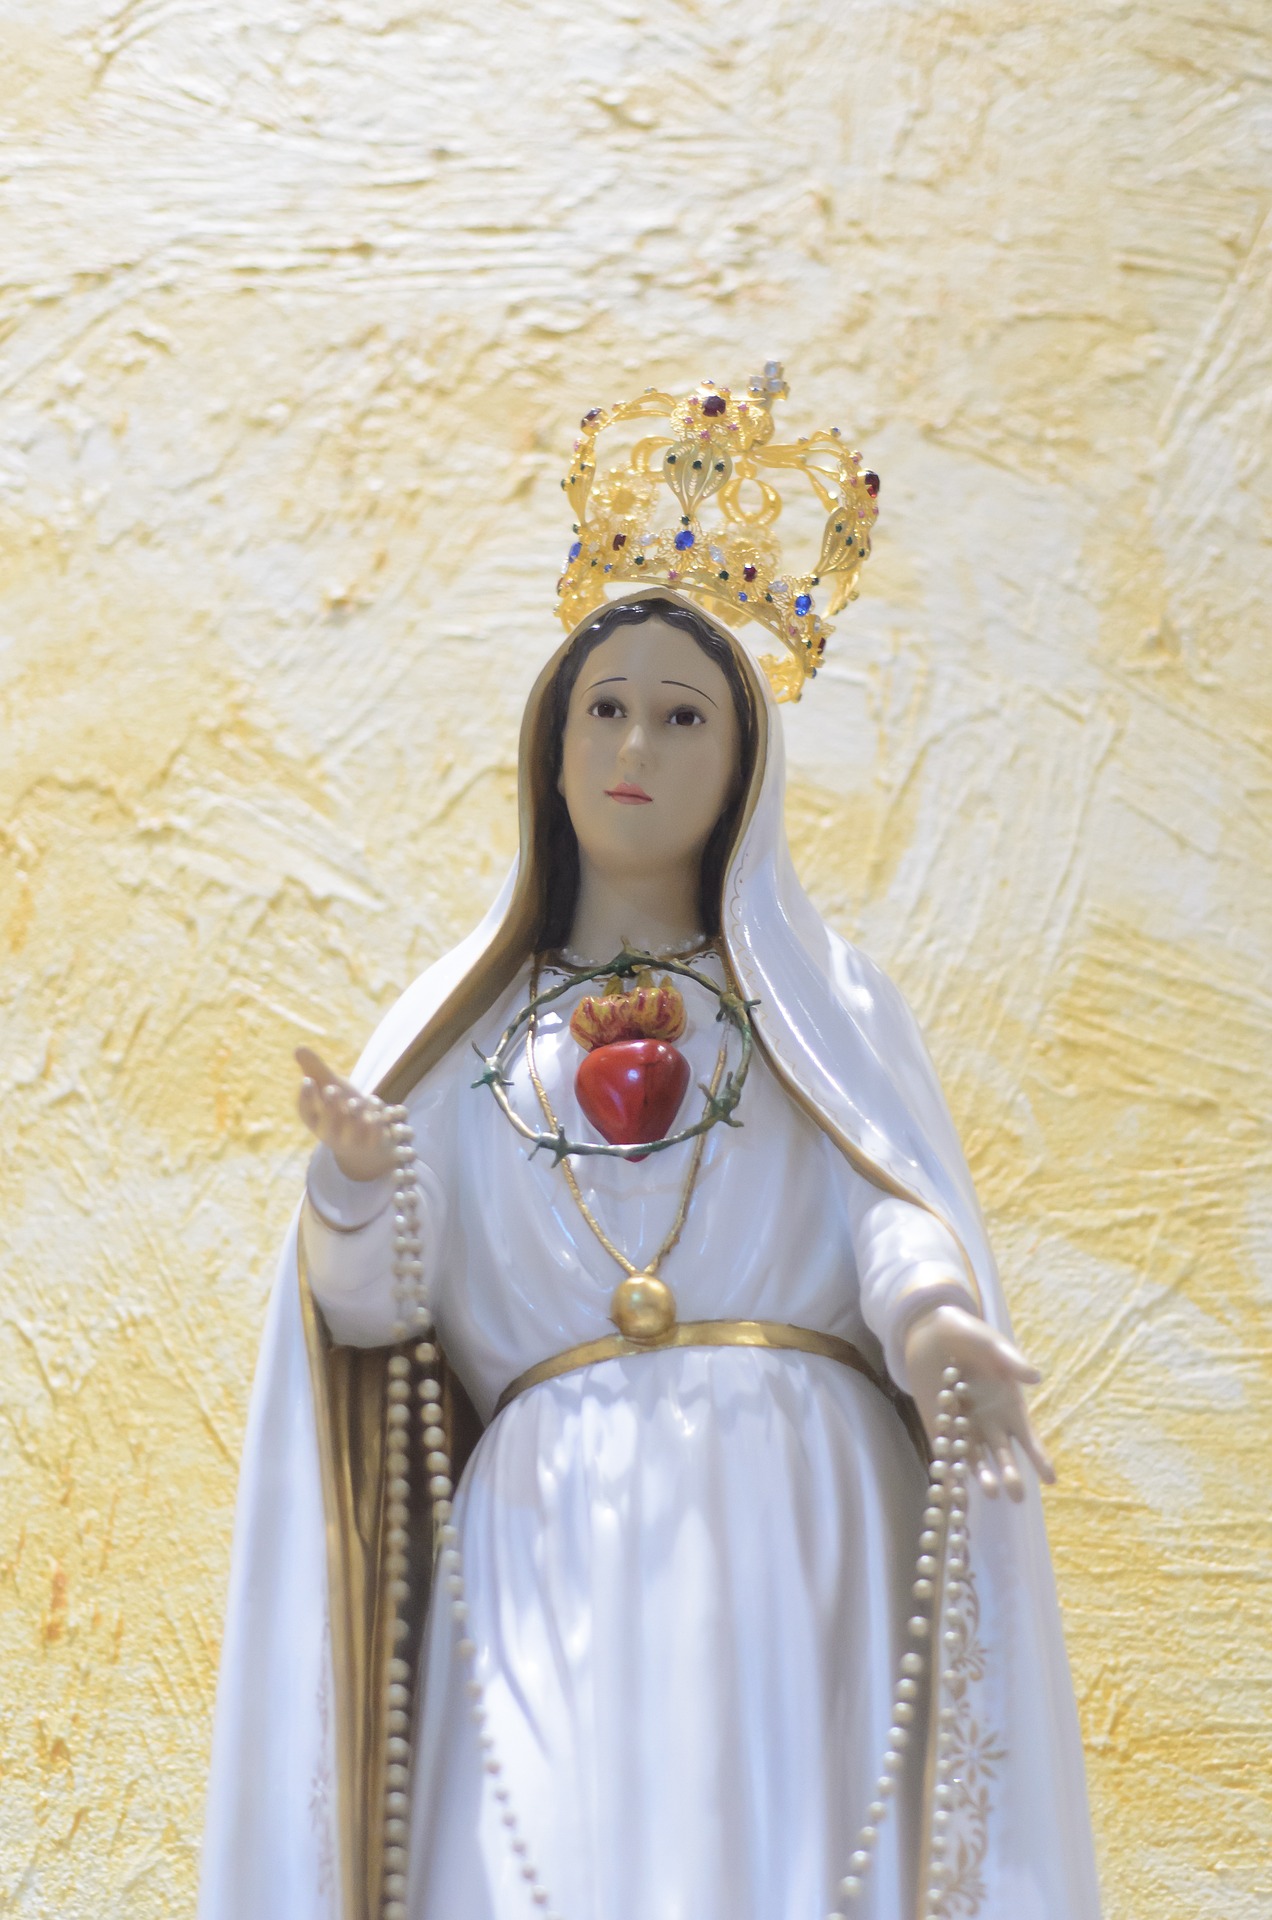 Statue of Our Lady of Fatima, displaying the bleeding Immaculate Heart surrounded by a Crown of Thorns